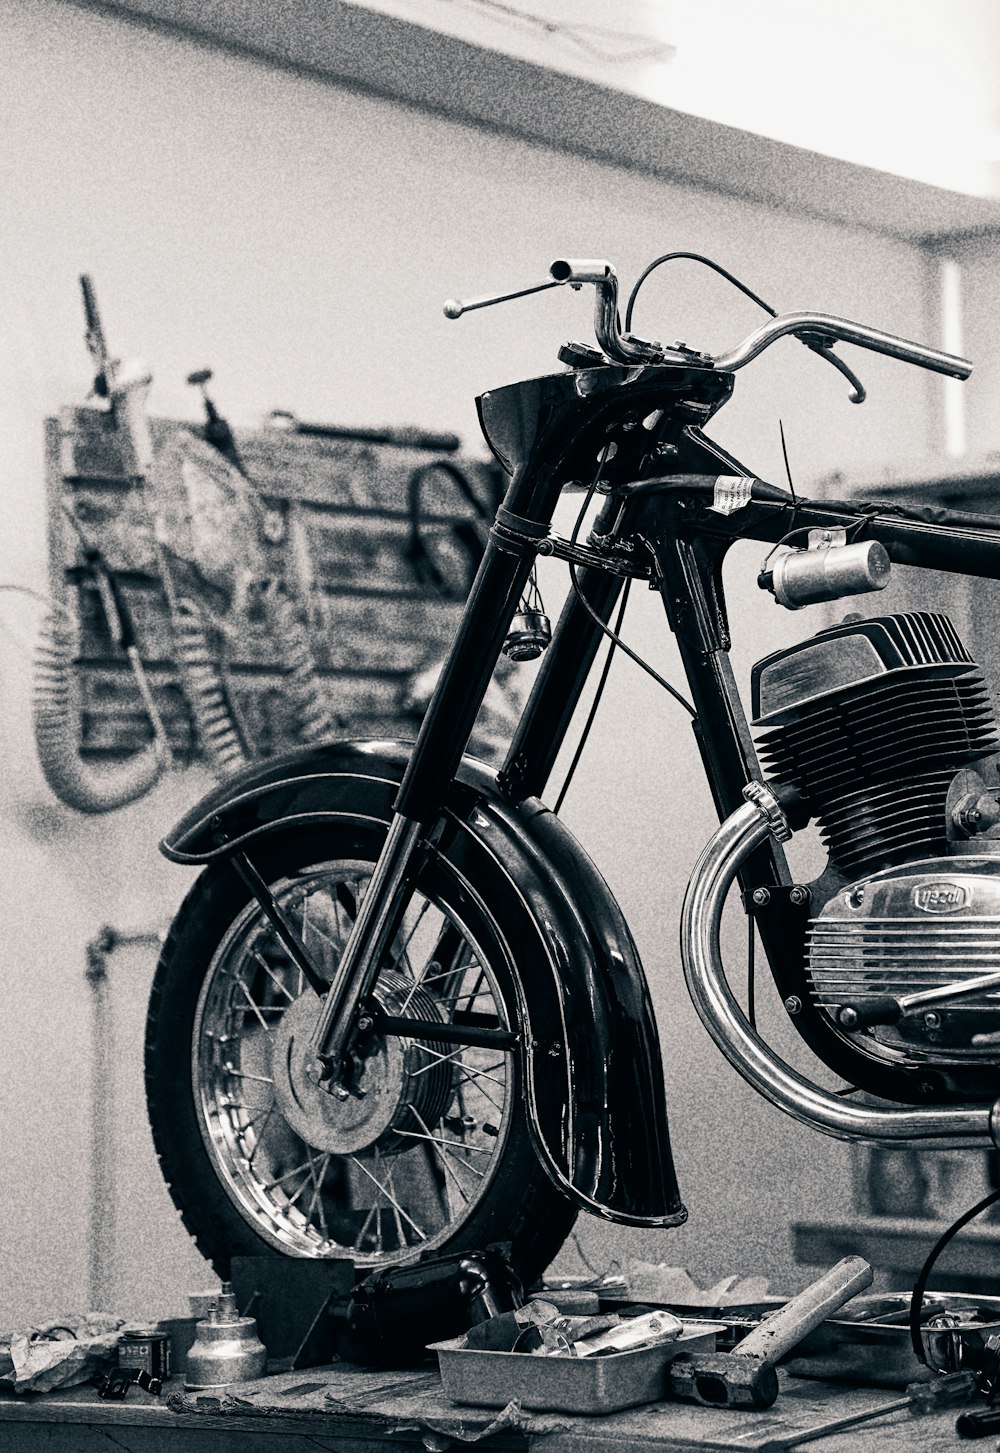 a black and white photo of a motorcycle